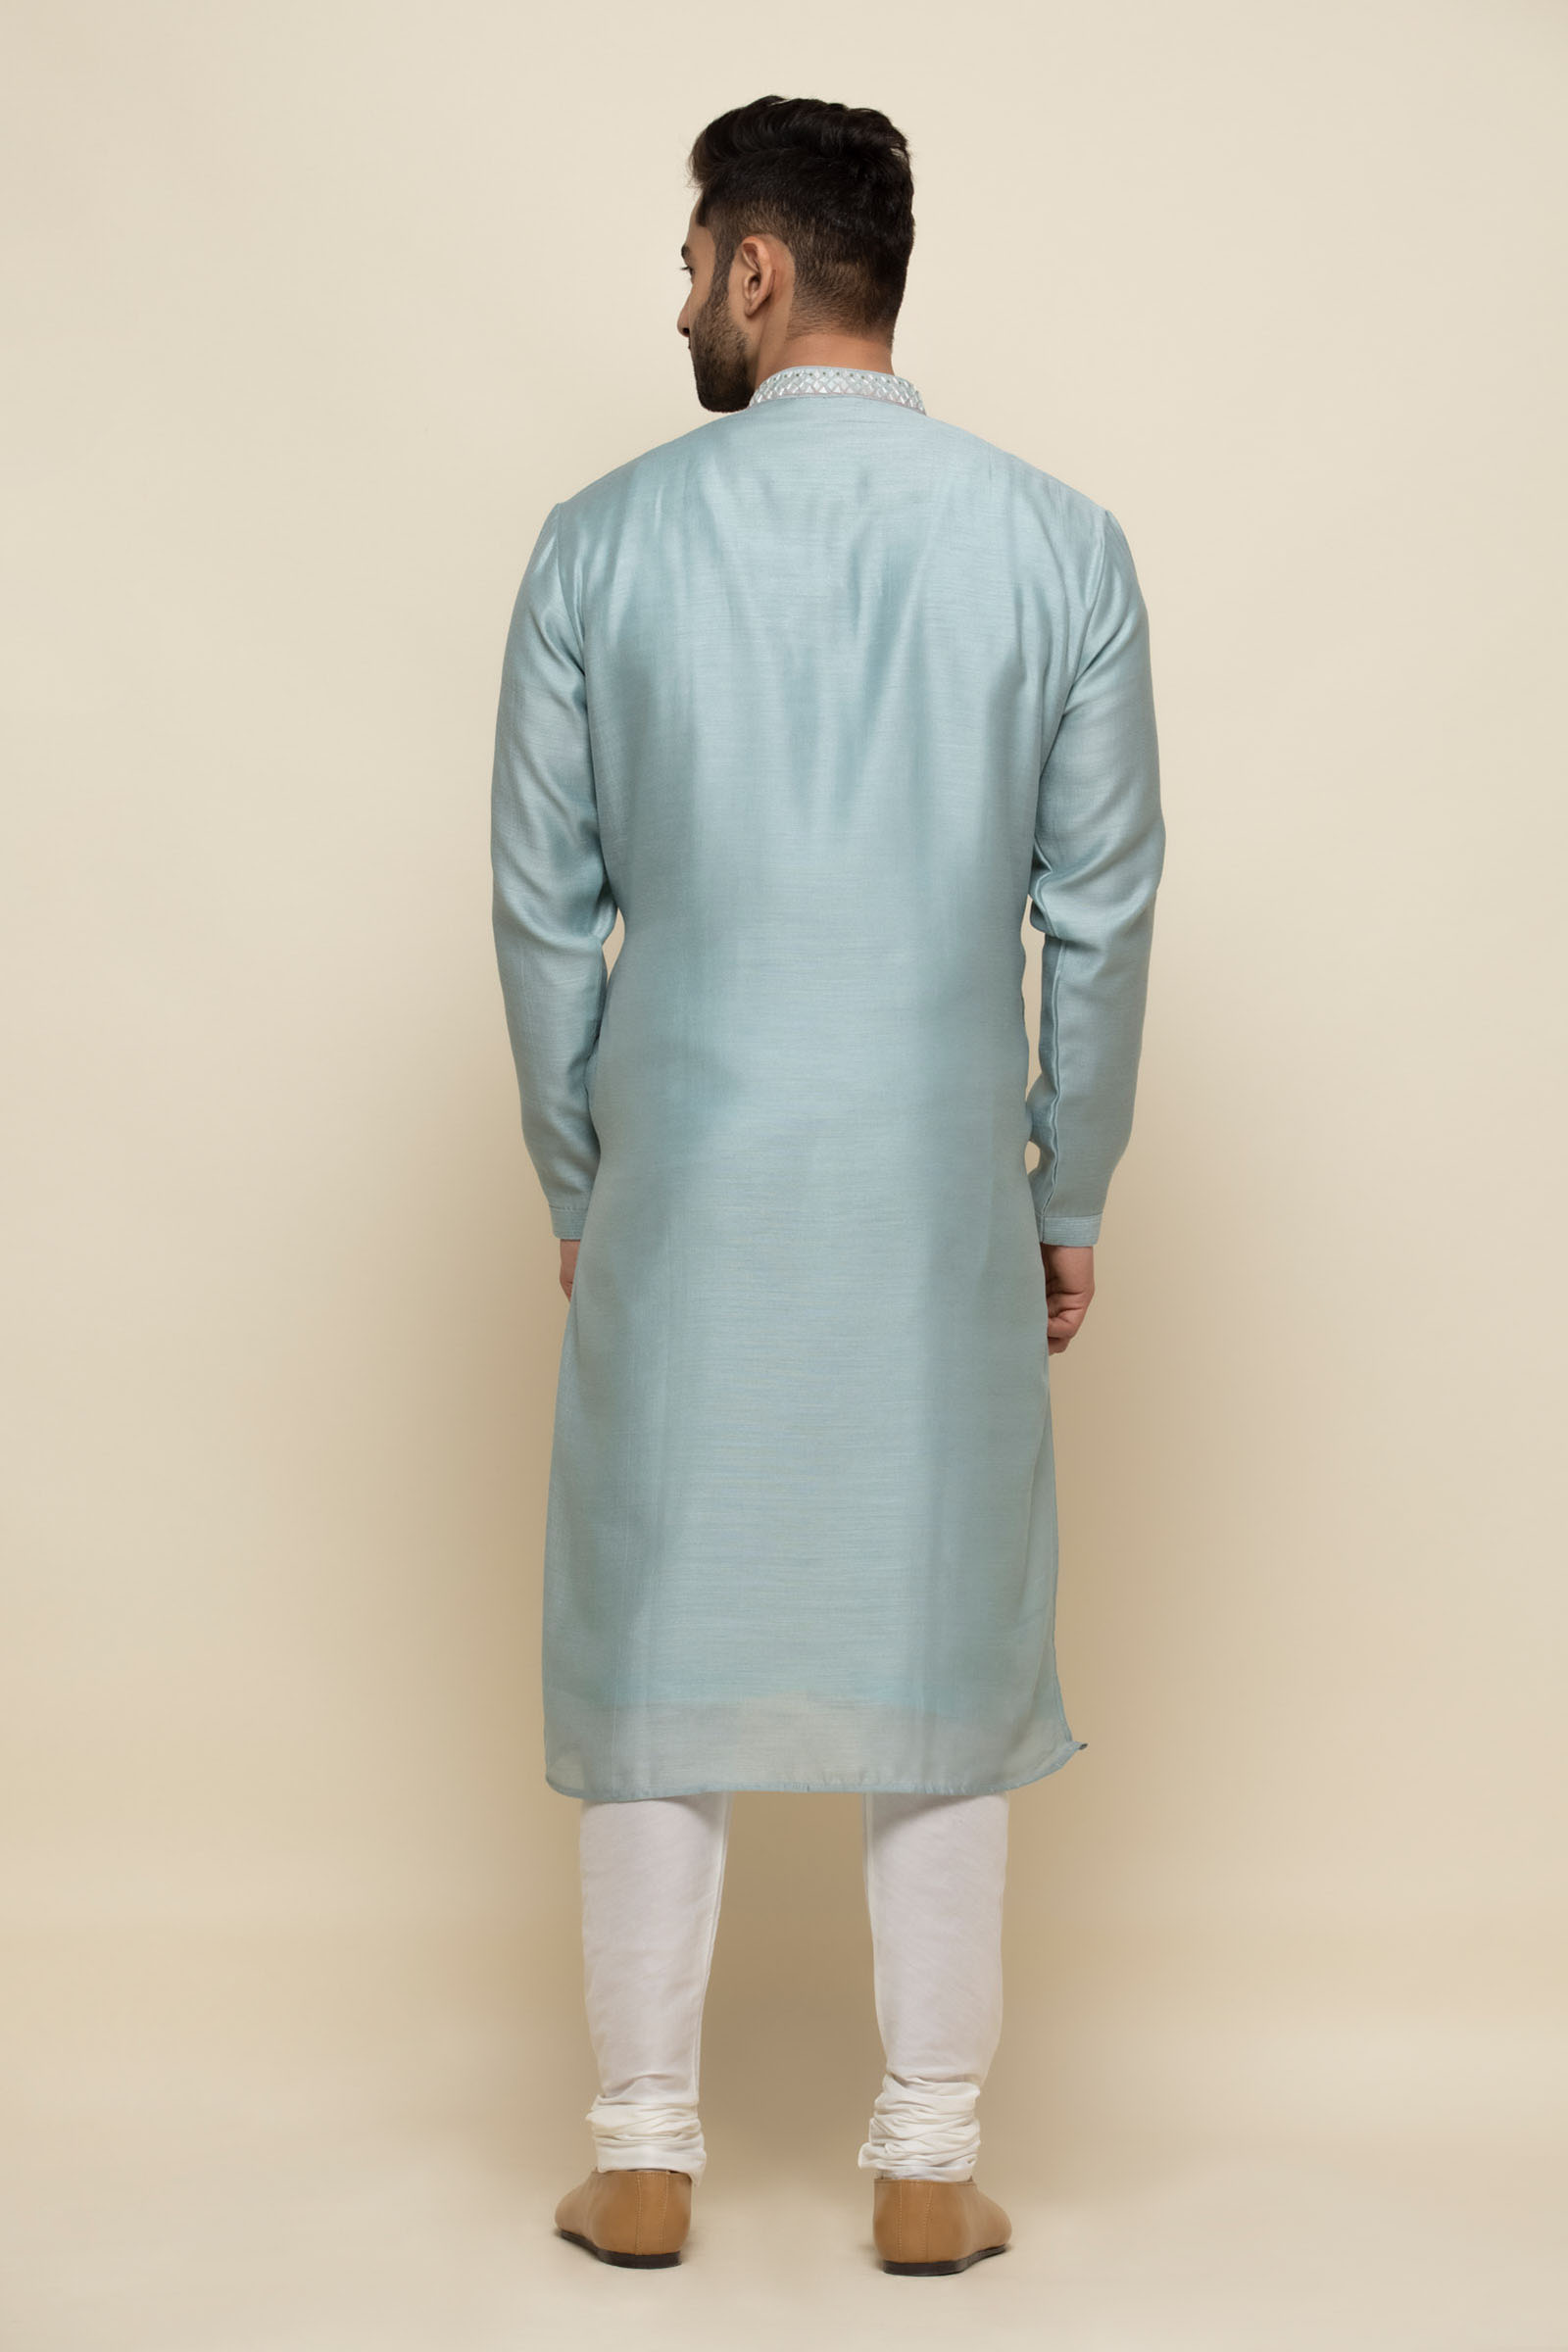 Buy Embroidered Cotton Aqua Blue Casual Kurti Online